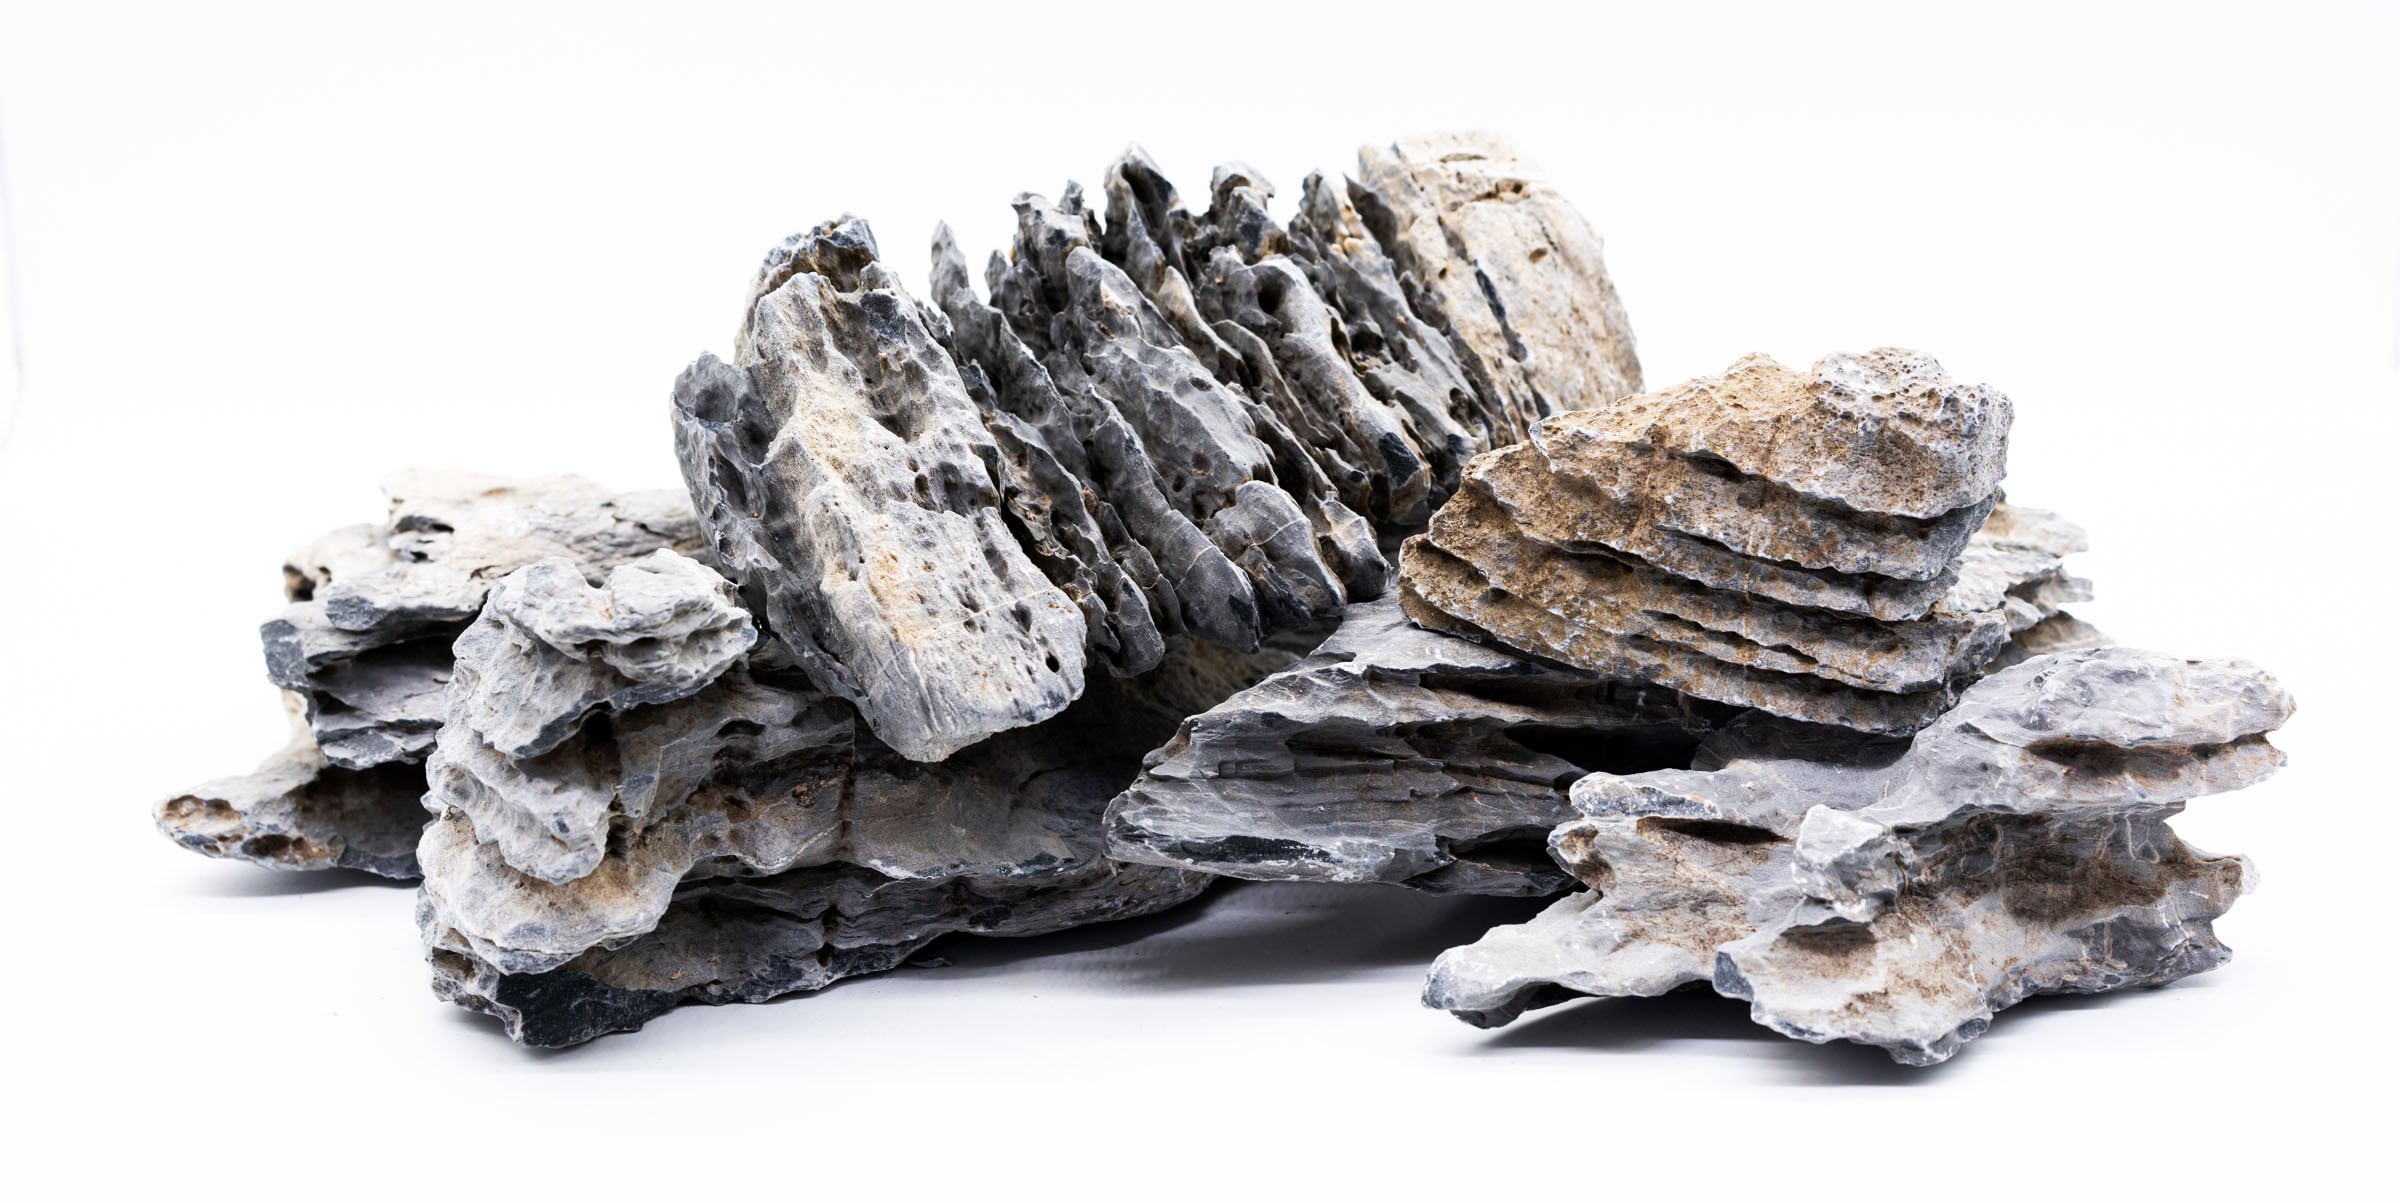 The Elements of Aquascaping: Rocks, Driftwood & Substrates